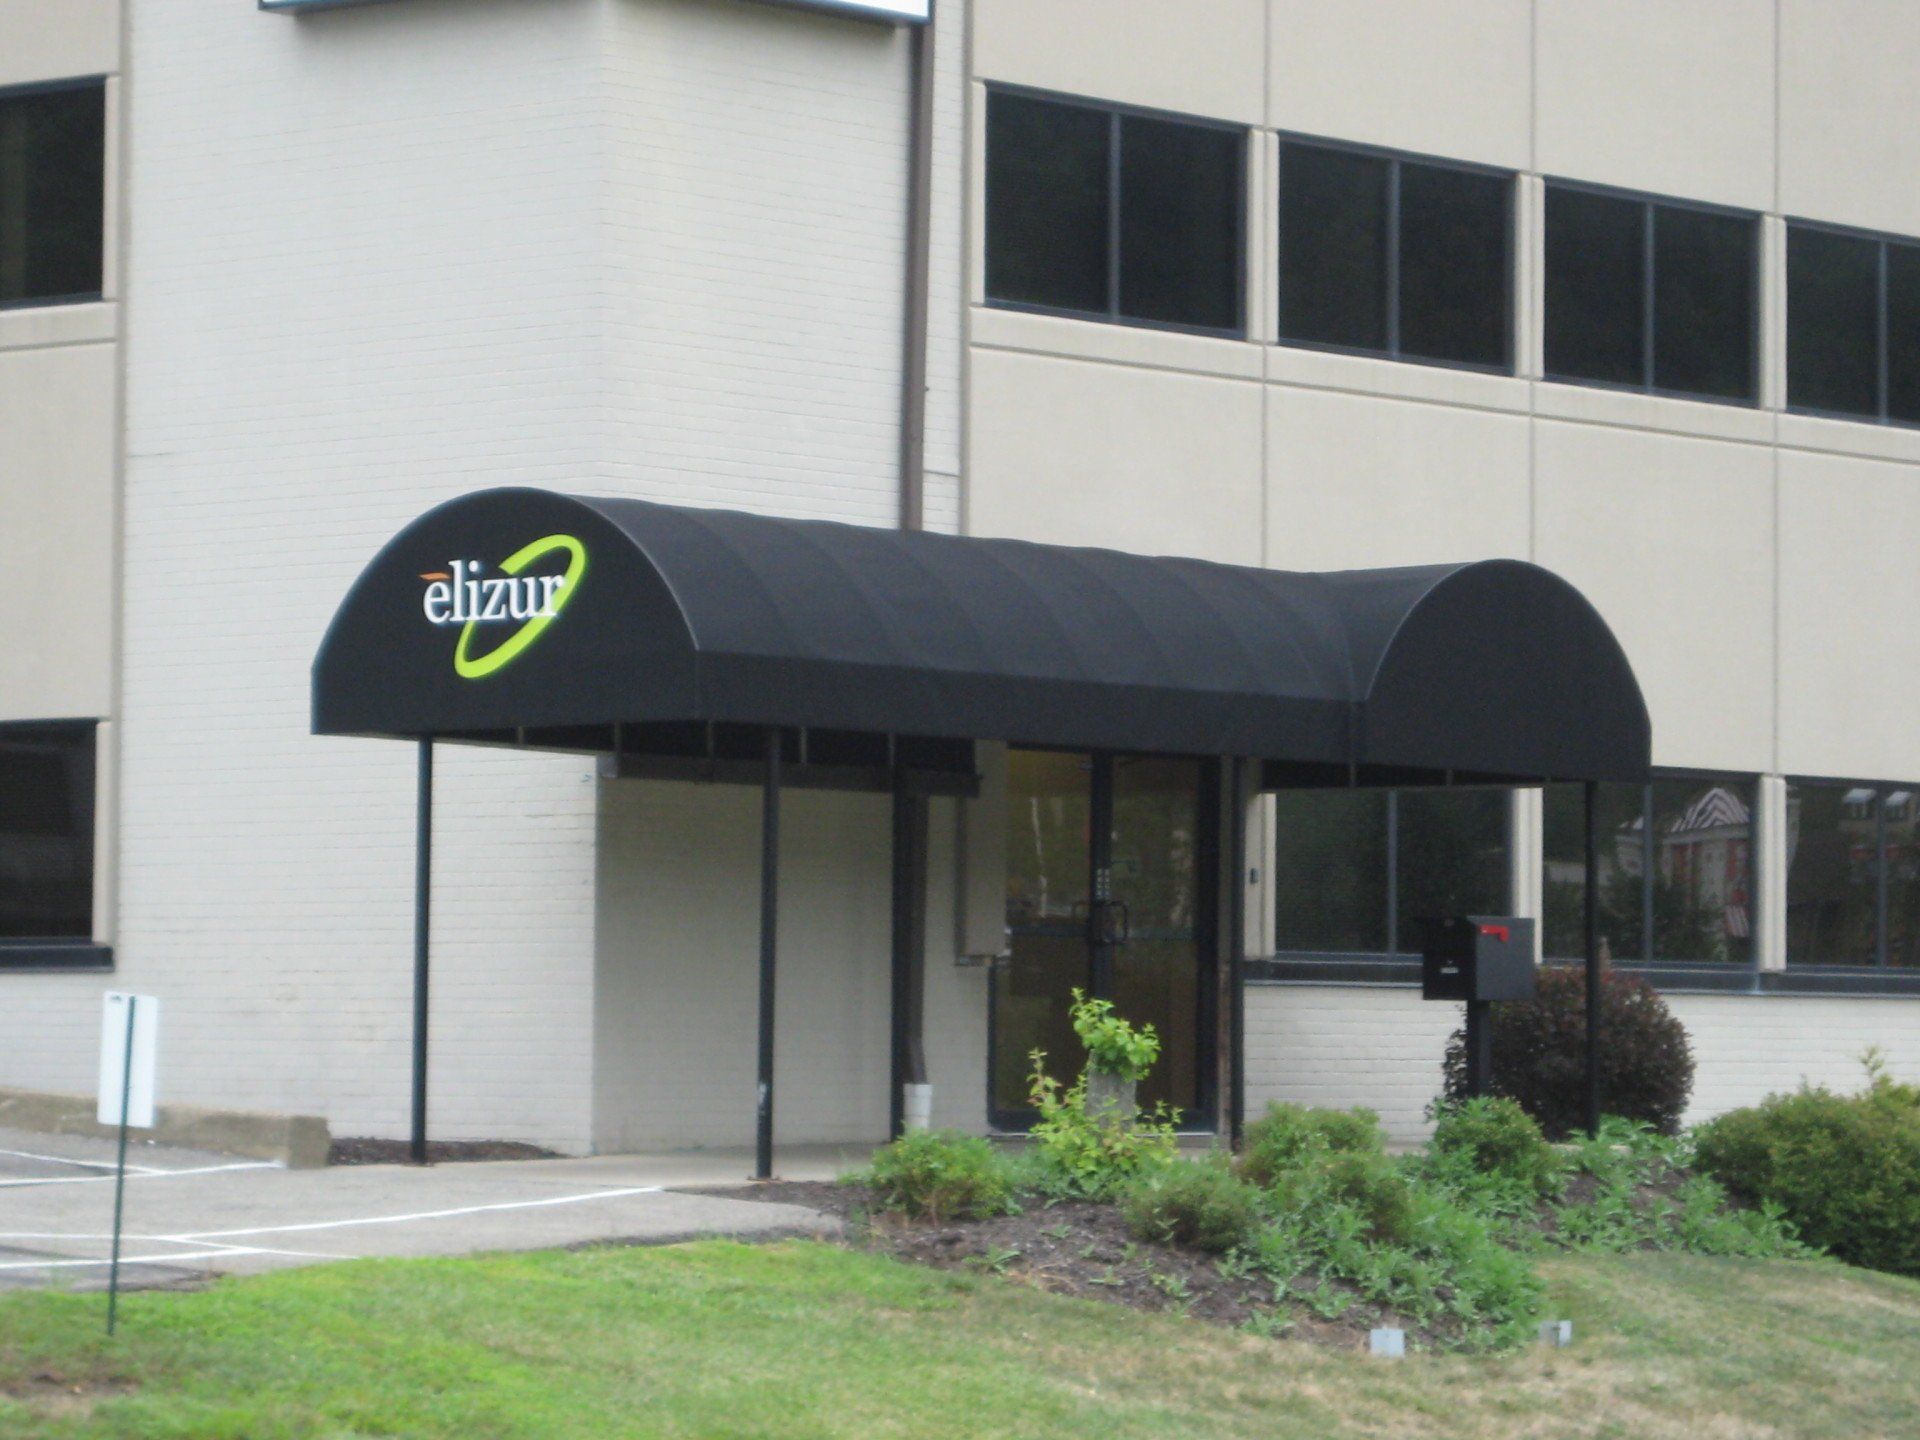 Commercial awning-17 — Custom awnings in Pittsburgh, PA